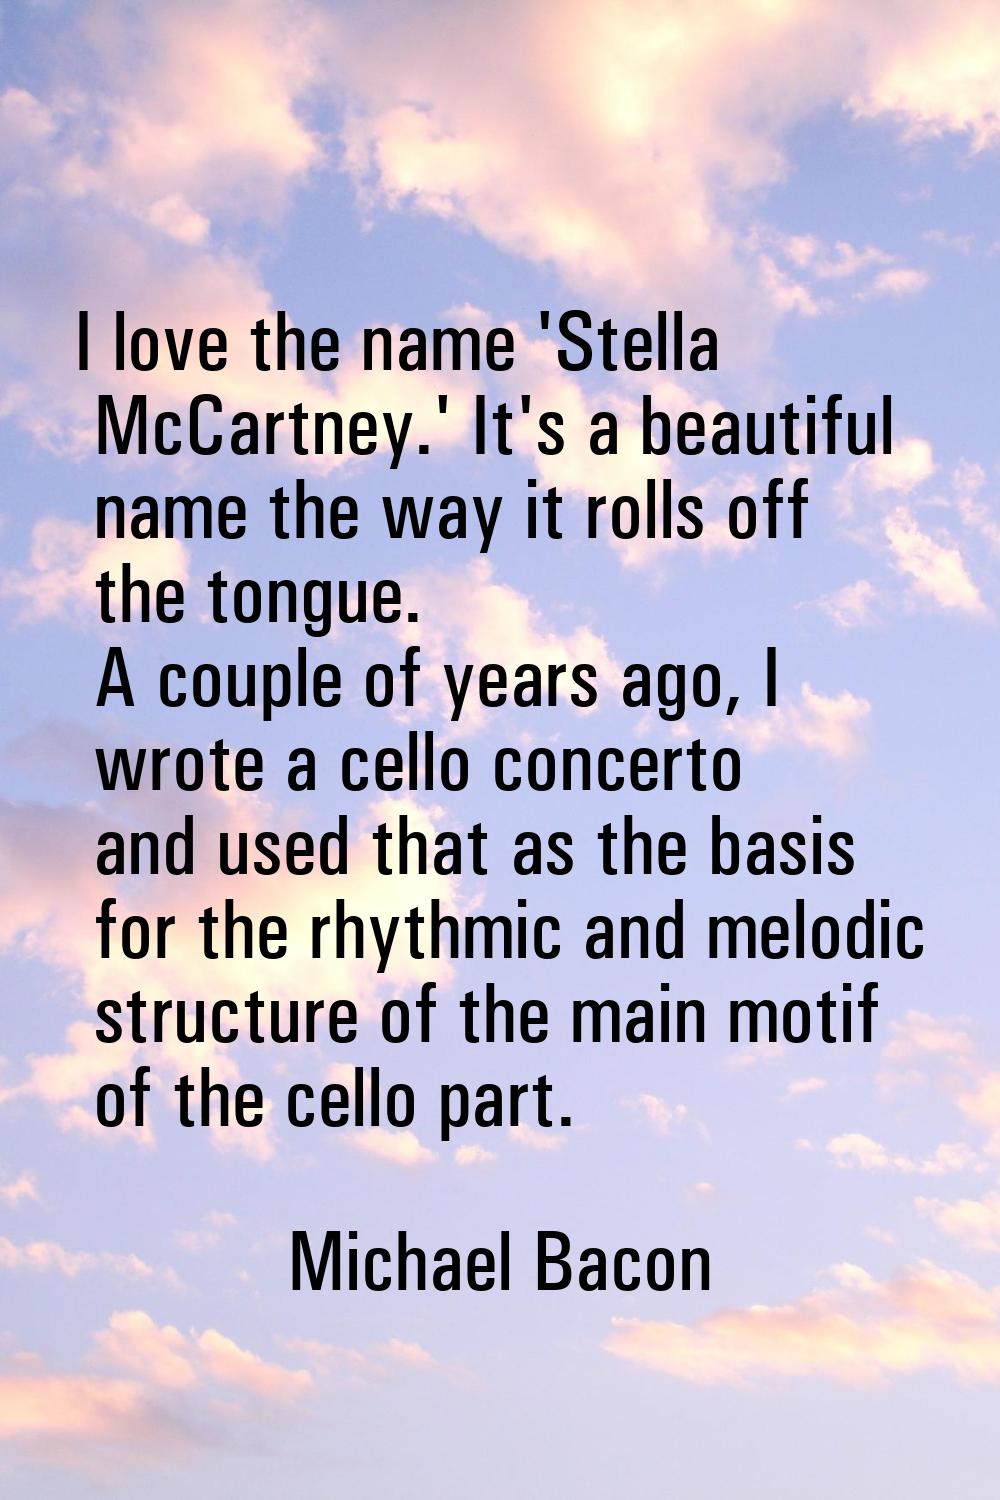 I love the name 'Stella McCartney.' It's a beautiful name the way it rolls off the tongue. A couple